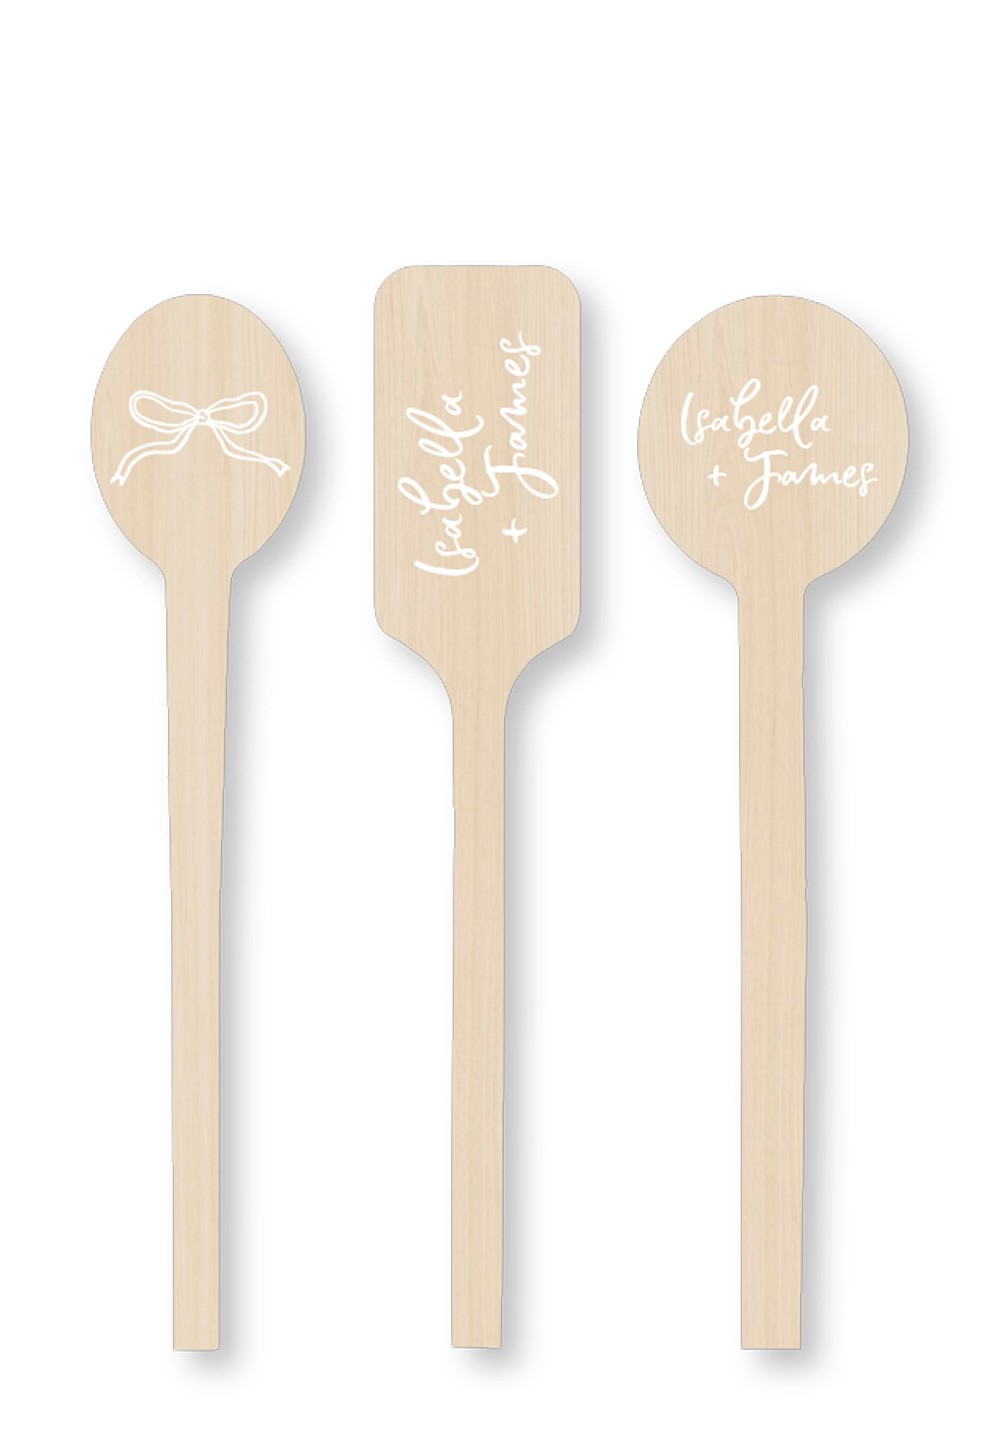 Daisy Cocktail Stirrers | Paper Daisies Stationery